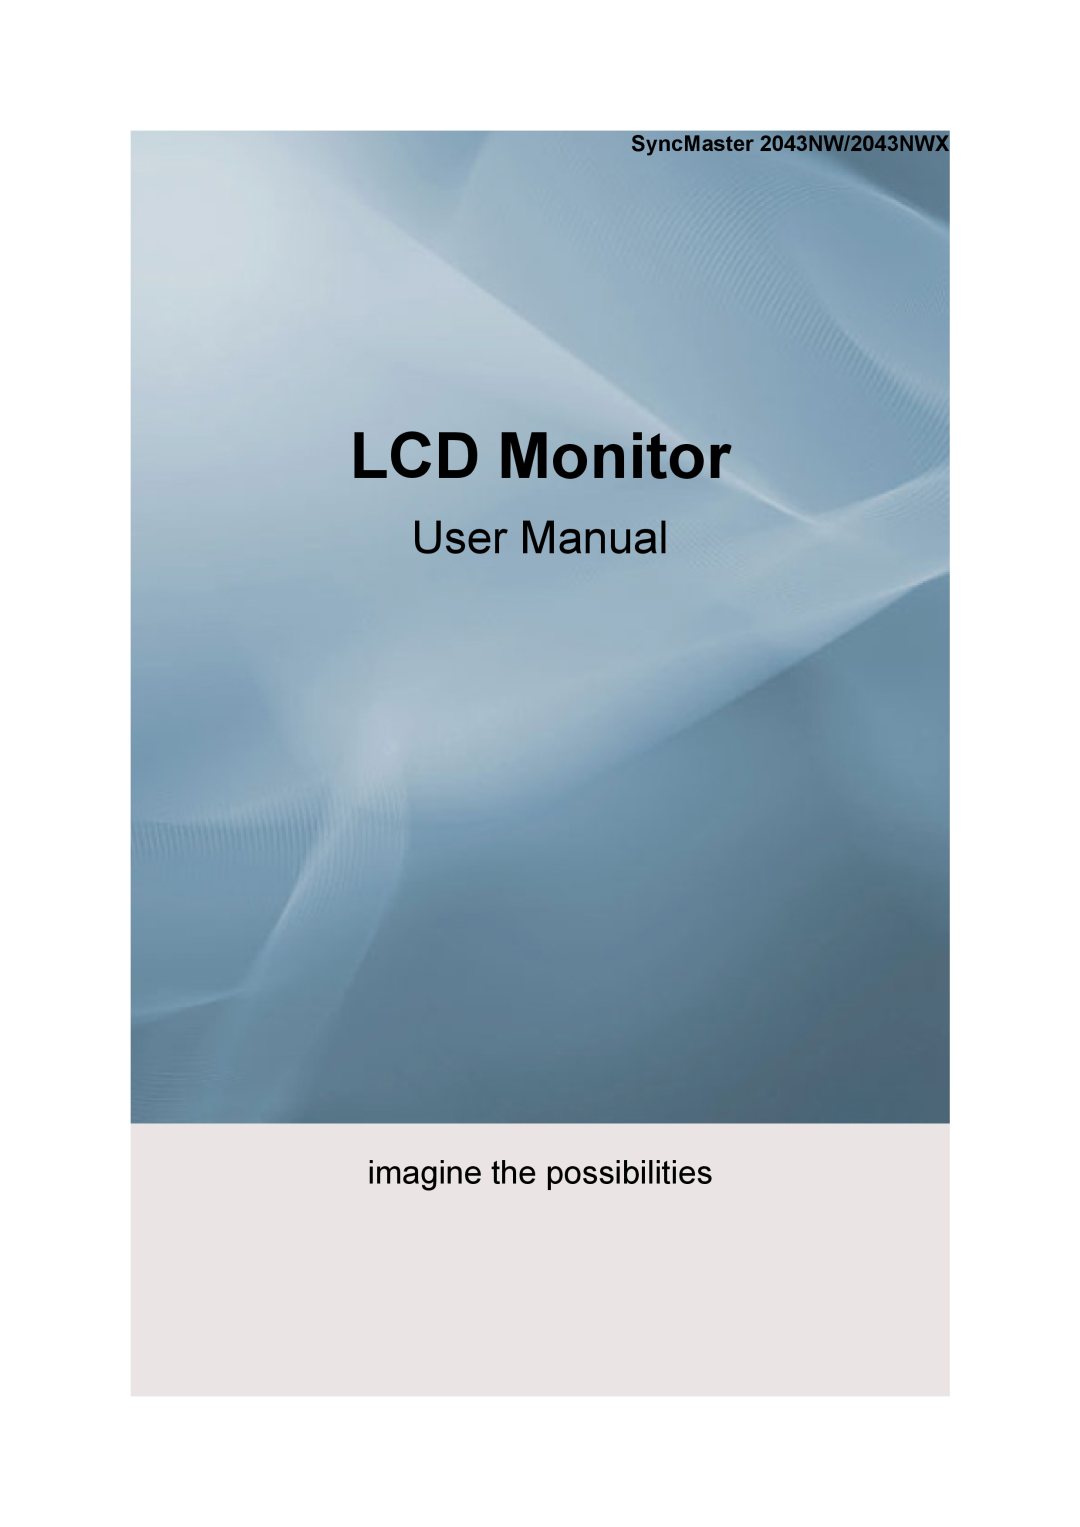 Samsung user manual SyncMaster 2043NW/2043NWX, LCD Monitor, User Manual, imagine the possibilities 